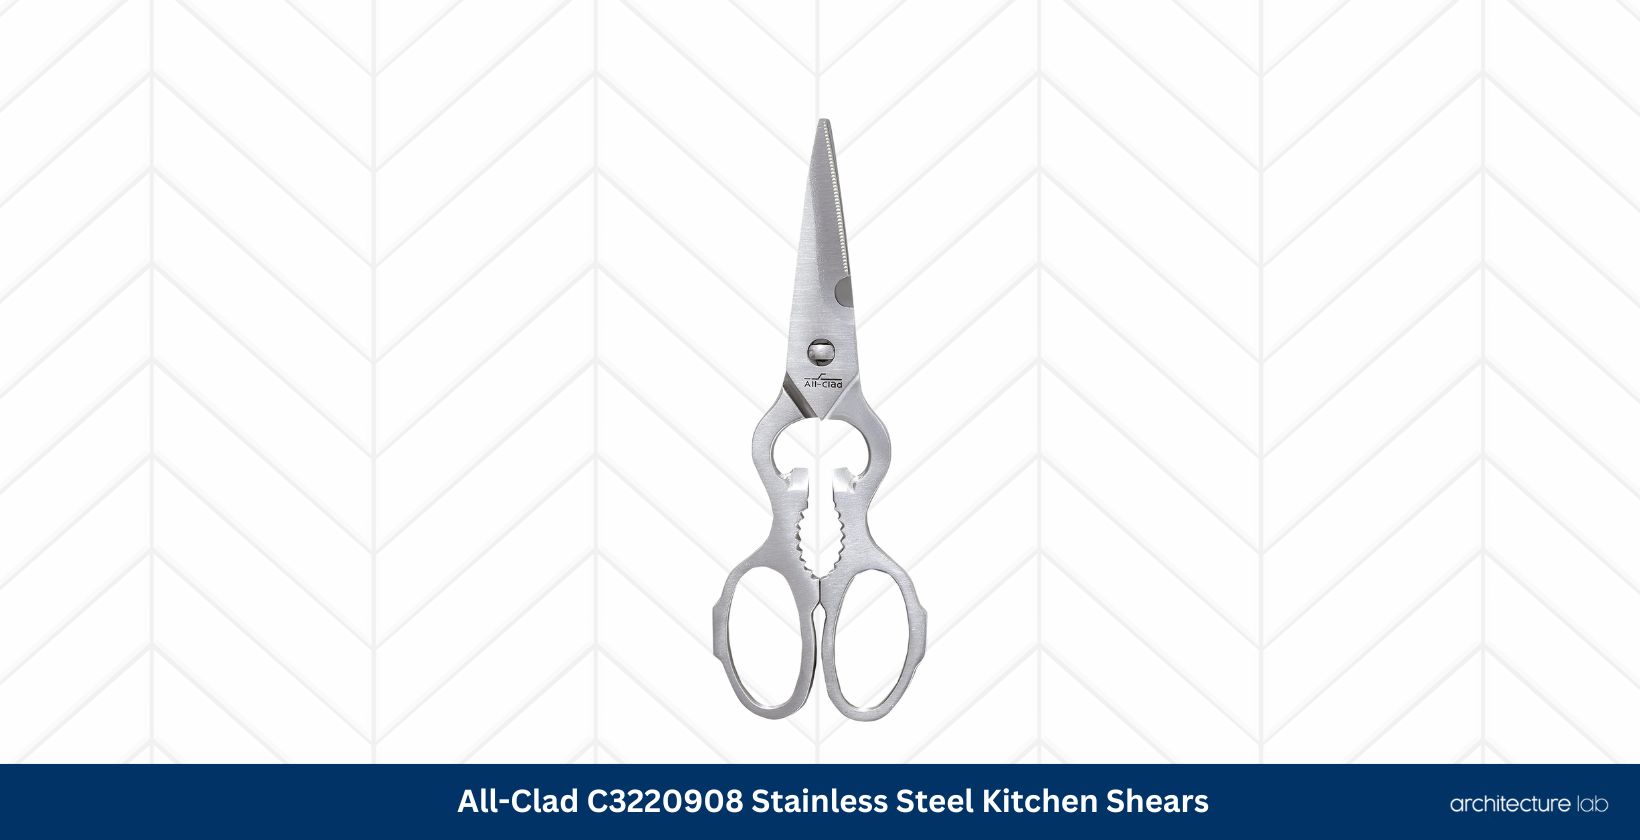 All clad c3220908 stainless steel kitchen shears0